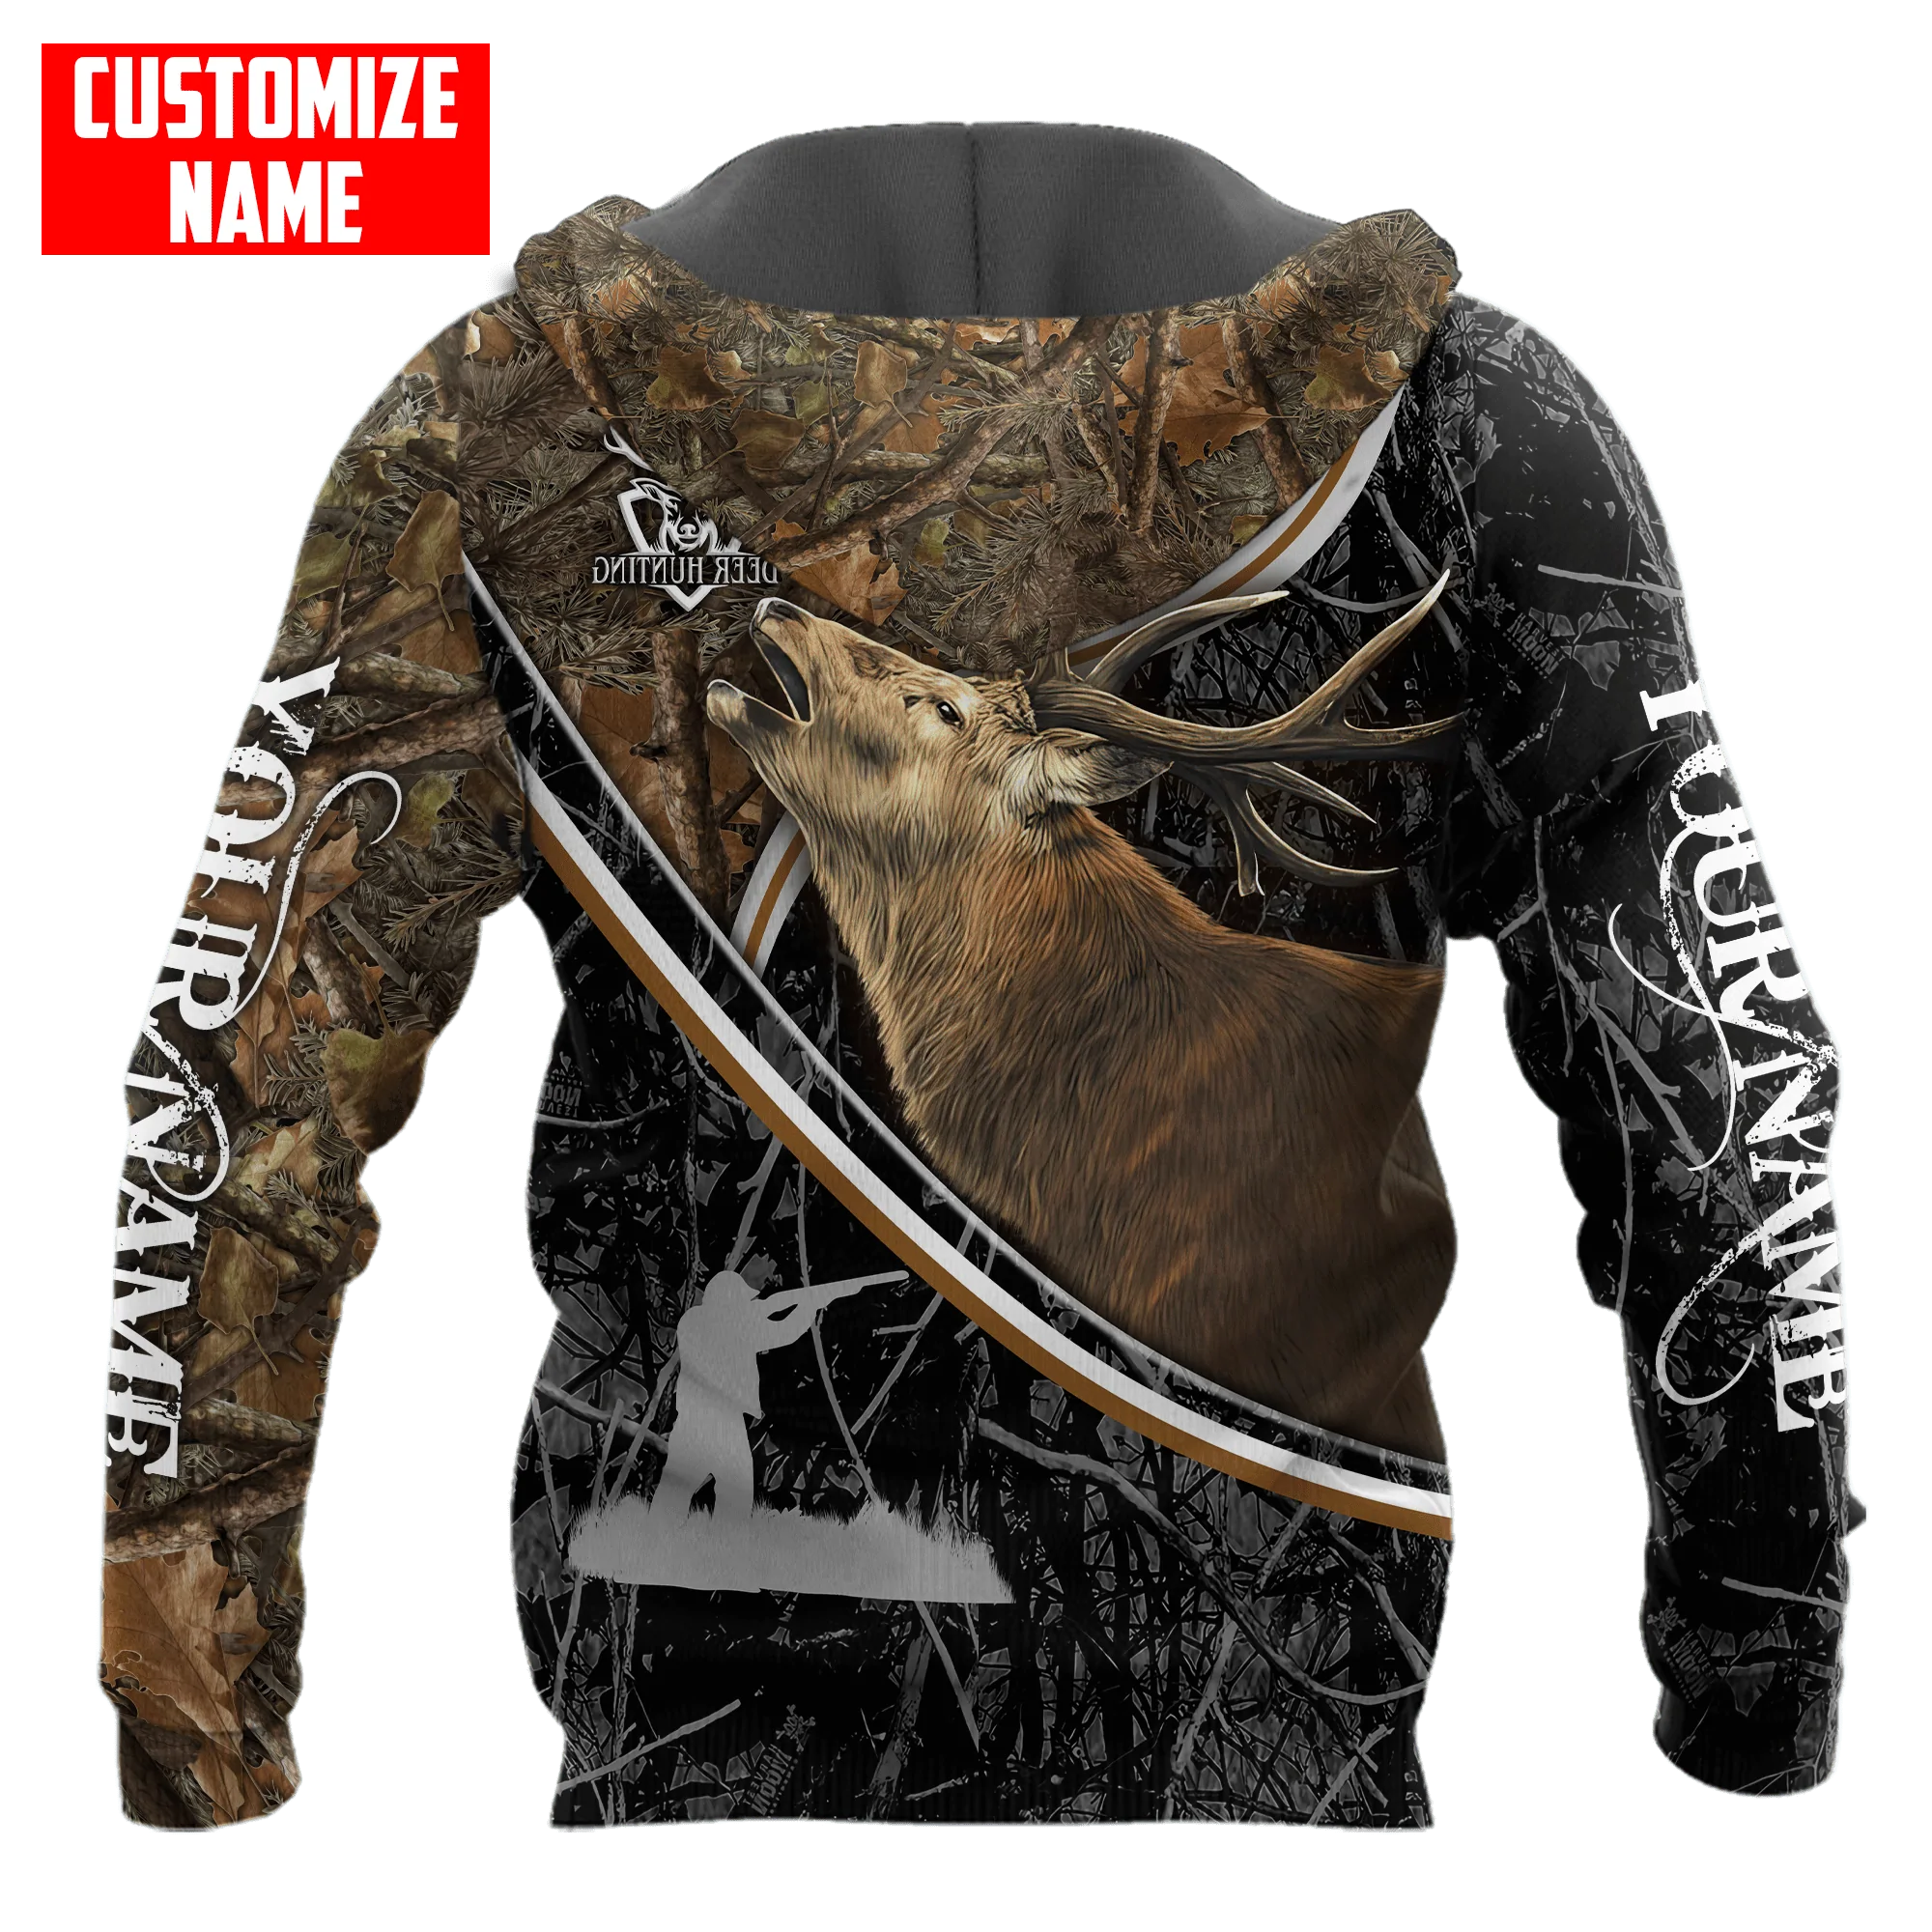 Personalized Name Hunter Hoodie For Him/ Deer Print On Hoodie 3D/ Deer Hunter Outfit/ Gift For Hunting Lover Hunting Club